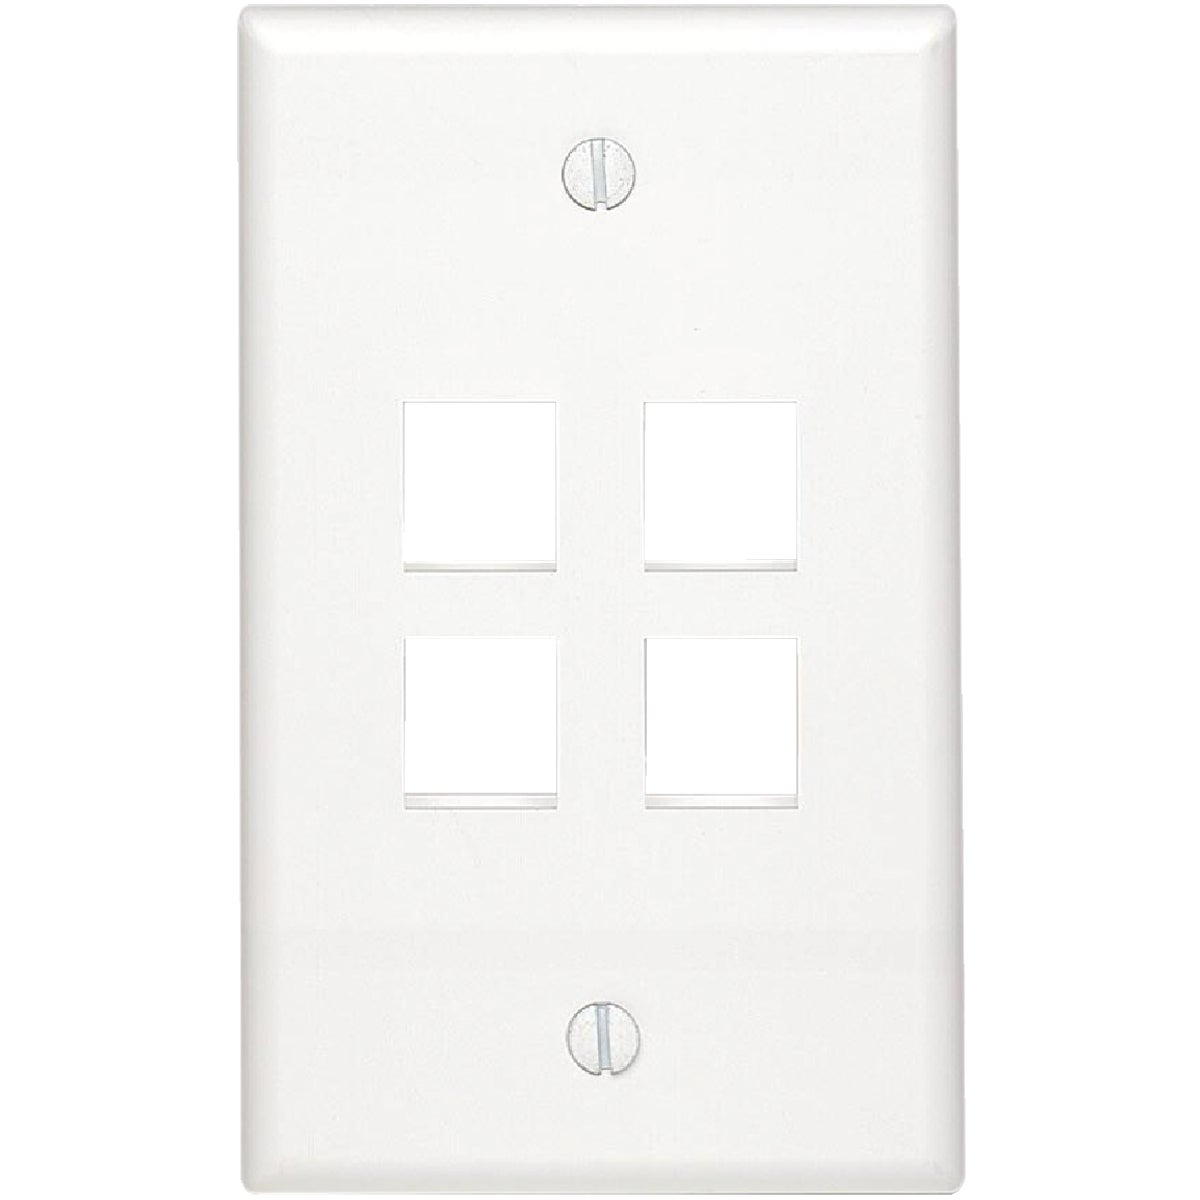 Item 558052, Quickport flush mount wall plates offer field-configurability in an 